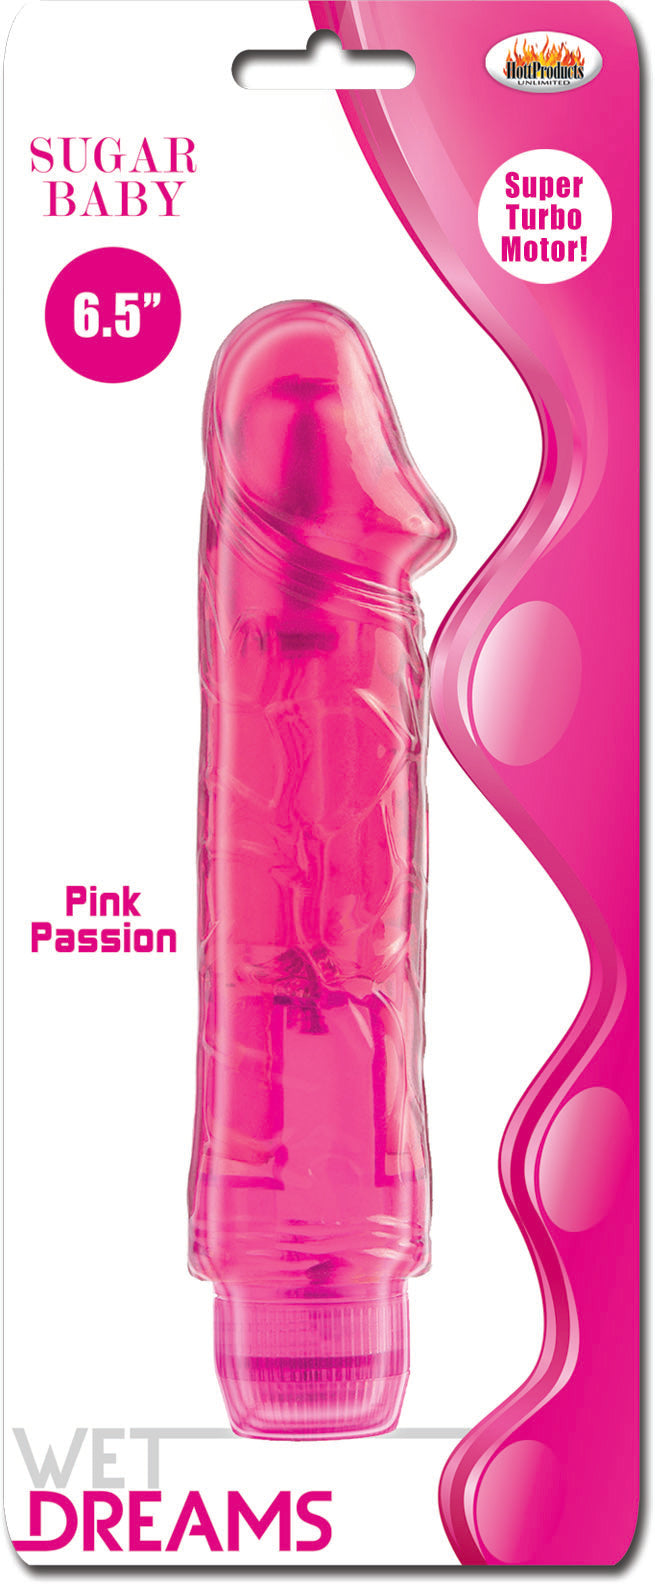 HOTT Products Wet Dreams Sugar Baby Pink Passion Realistic Vibrator at $19.99